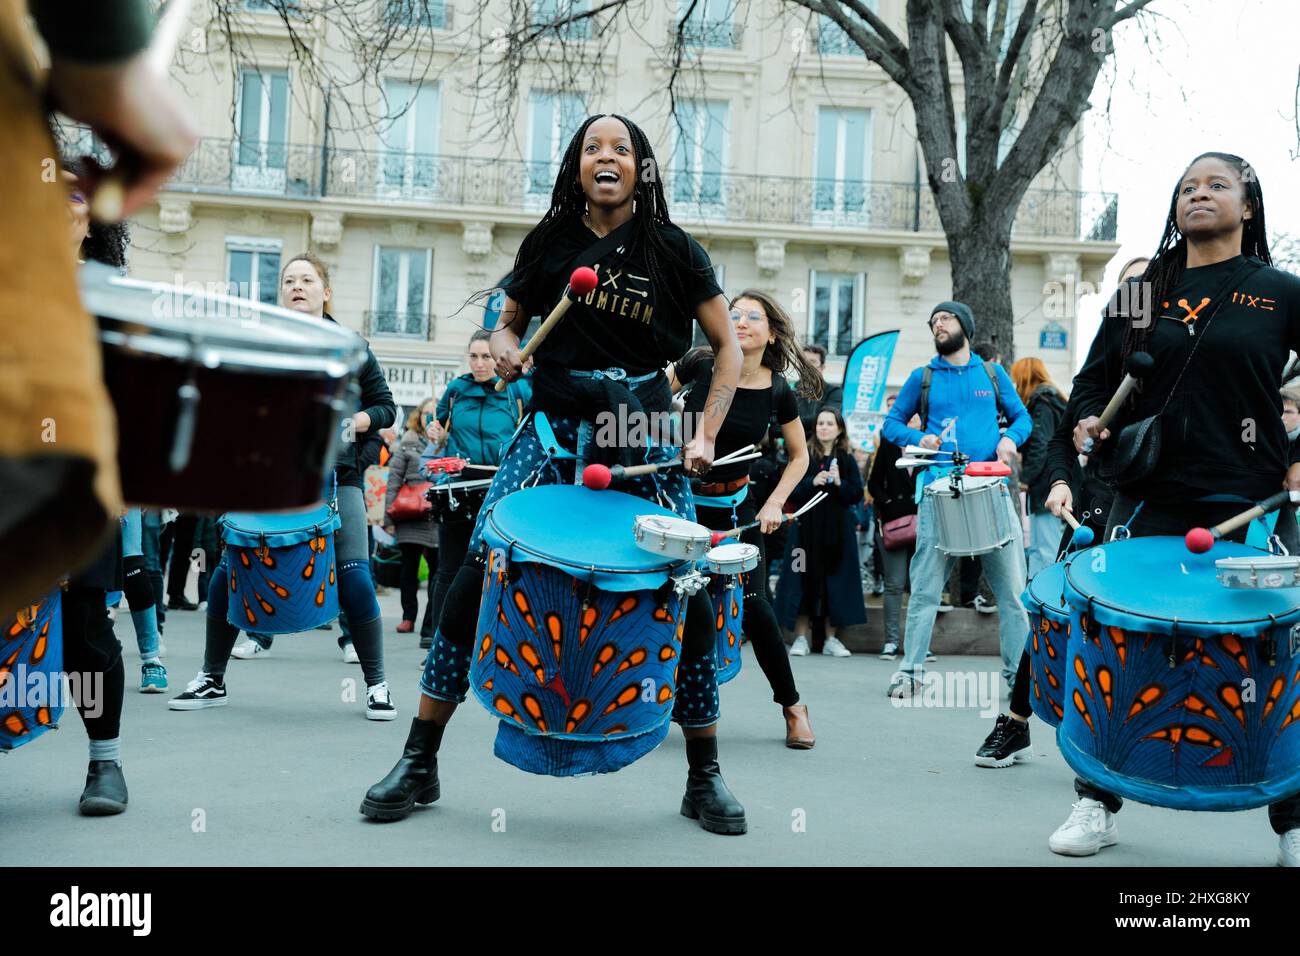 A demonstrator is playing music. March for the climate with the slogan “Look up!, a demonstration to open your eyes”, this in the face of the climate emergency underlined by the recent report of the IPCC (Intergovernmental Panel on Climate Change), on March 12, 2022 in Paris, France. Photo by Christophe Michel / ABACAPRESS.COM Stock Photo